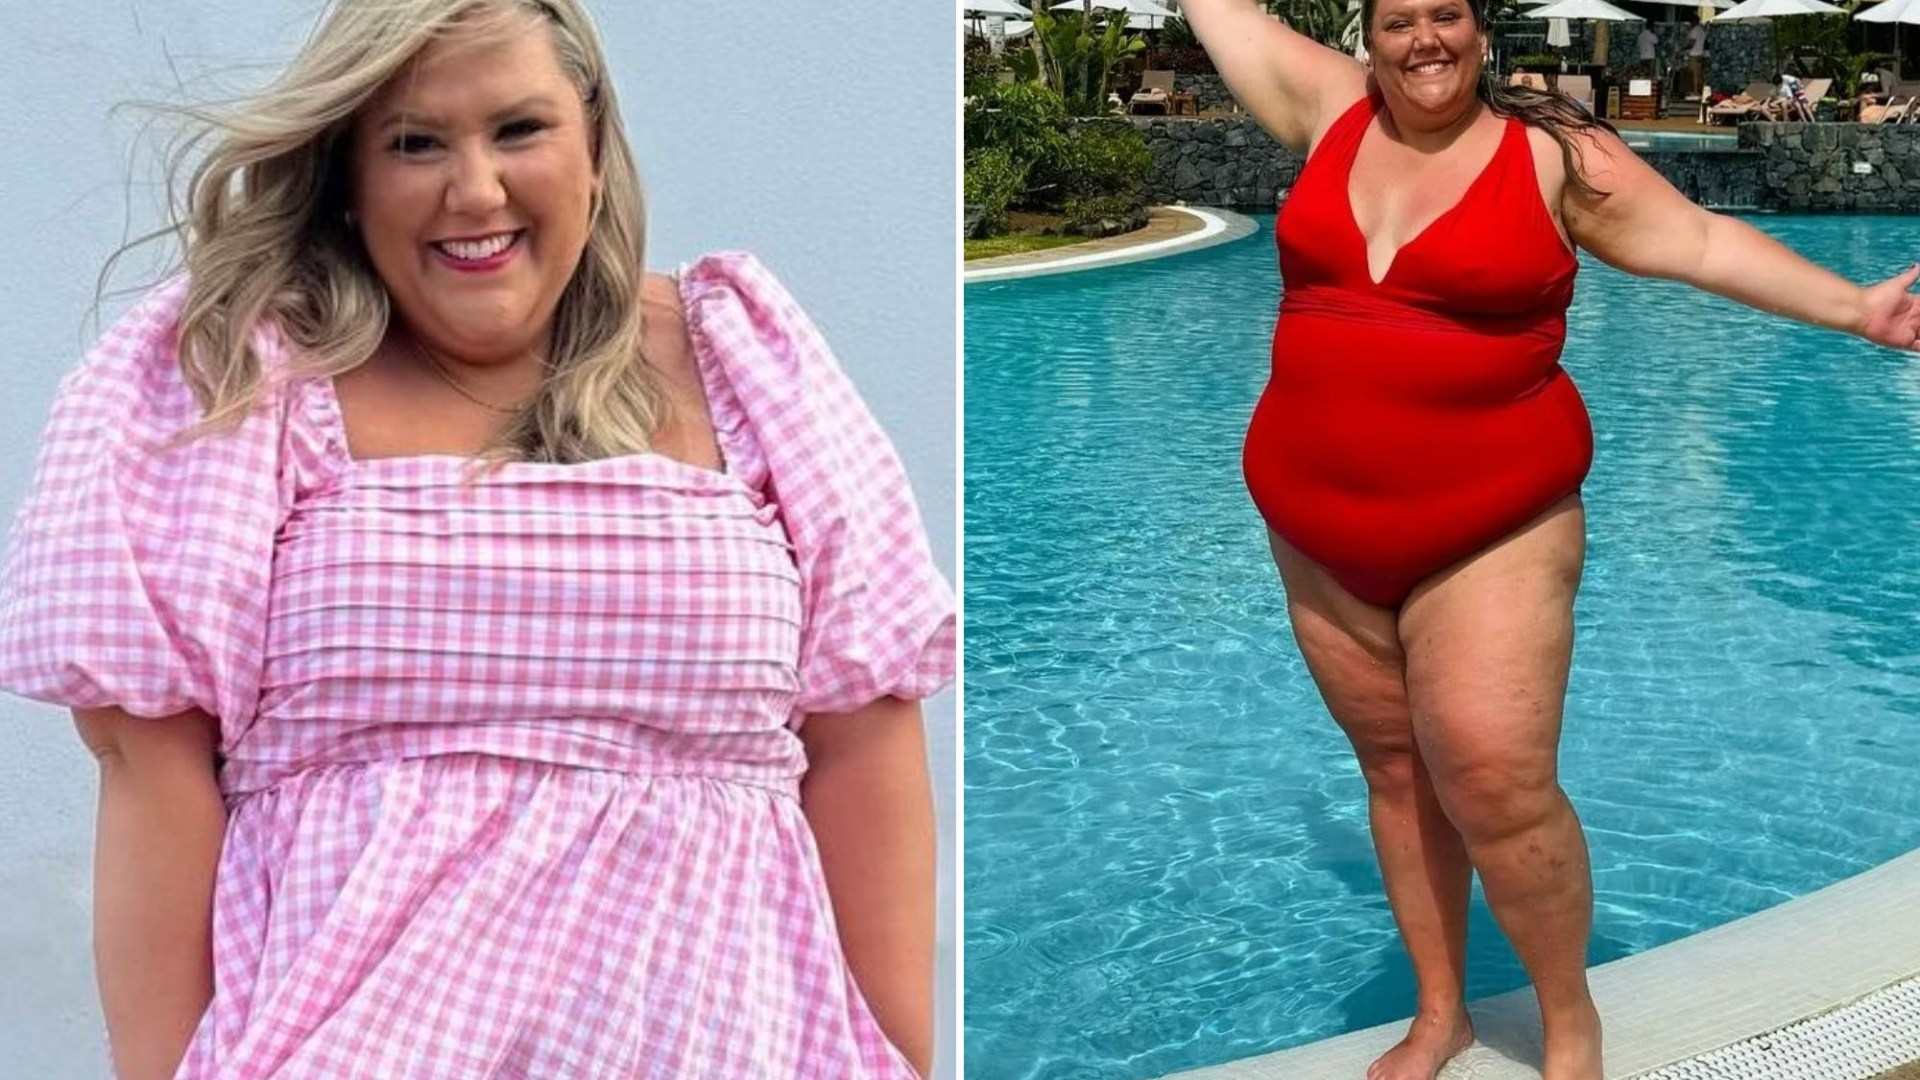 I’m a size 26 & love showing off my curvestrolls accuse me of promoting obesity but I’m just fat and don’t hate myself [Video]